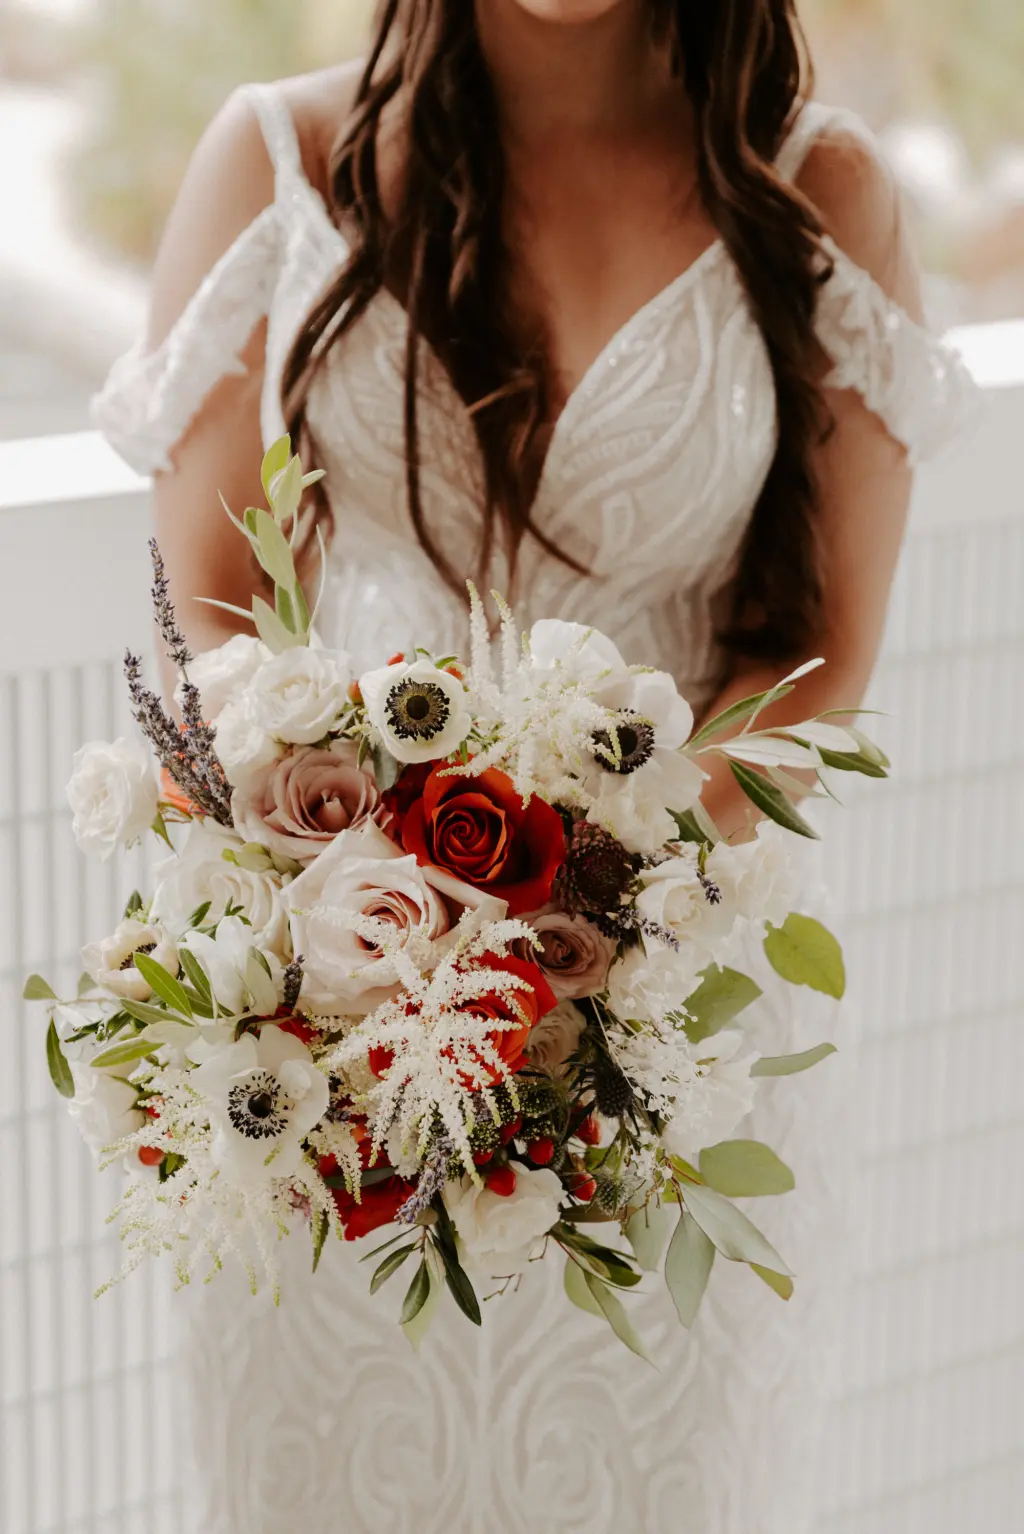 Boho Wedding Bouquet With Pink and Orange Roses, White Ferns, Anemones, and Greenery Ideas